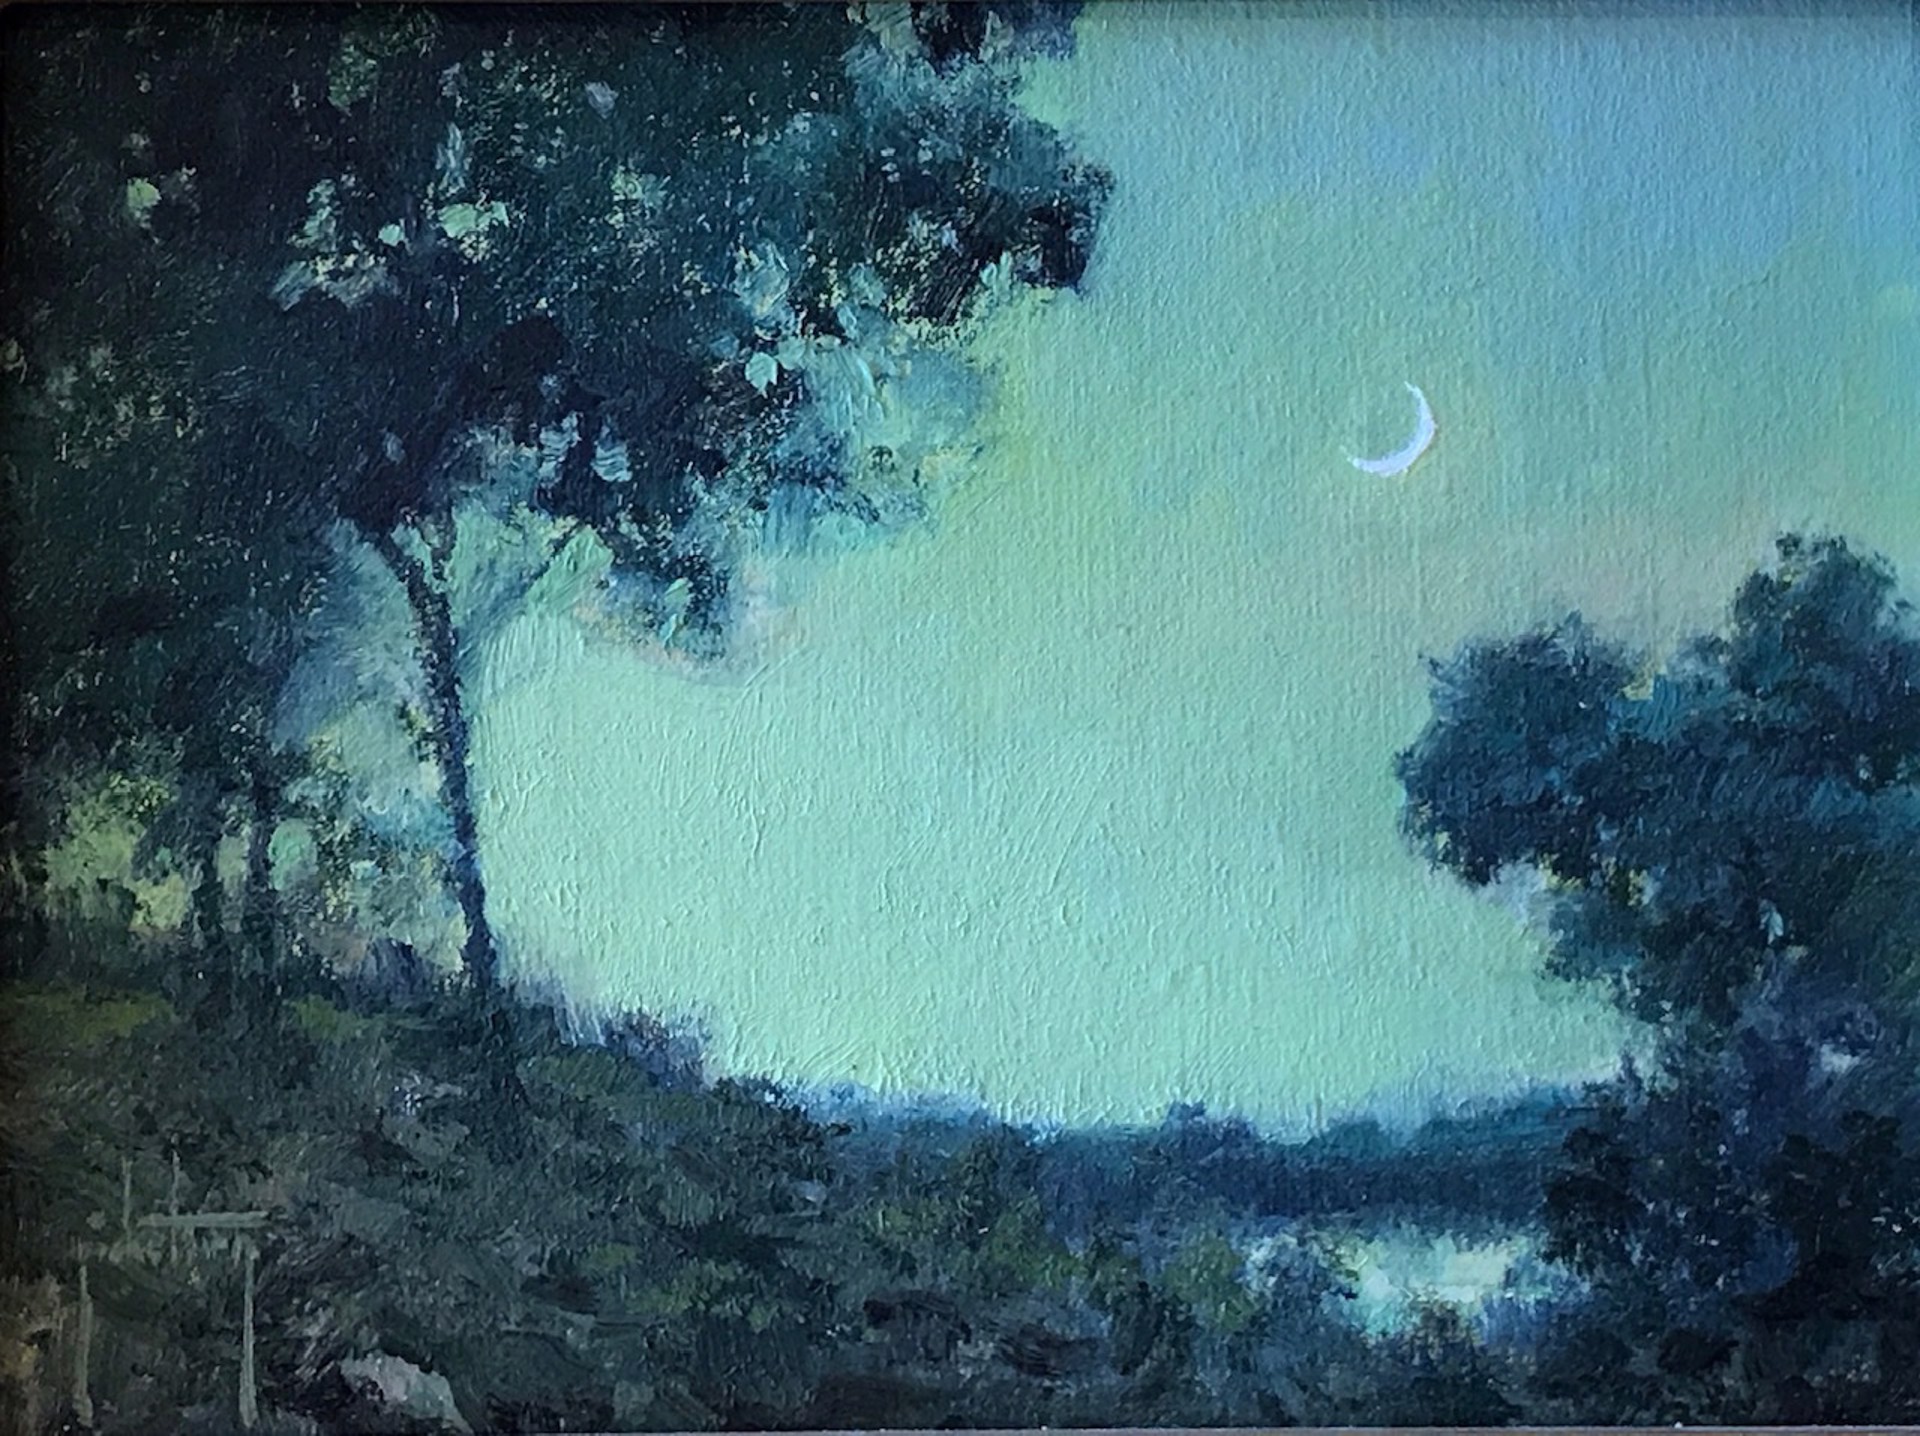 Crescent Moon by Jerry Ricketson